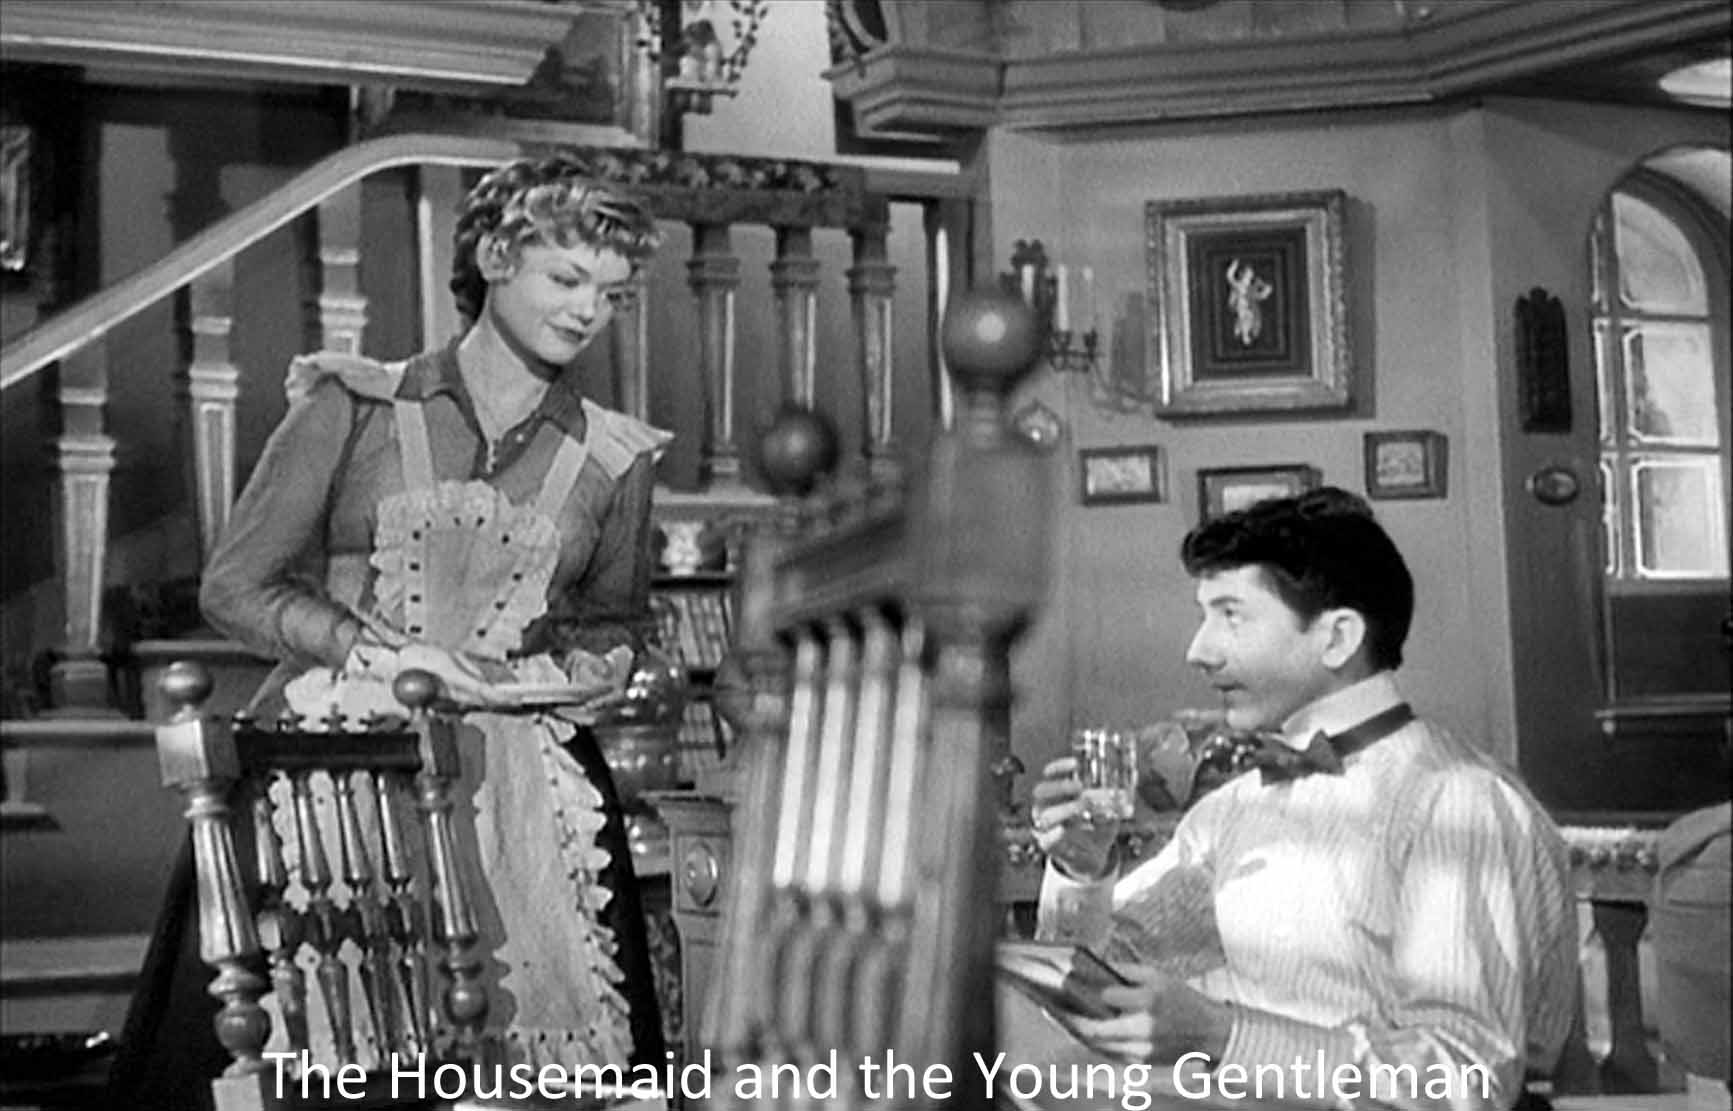 The Housemaid and the Young Gentleman